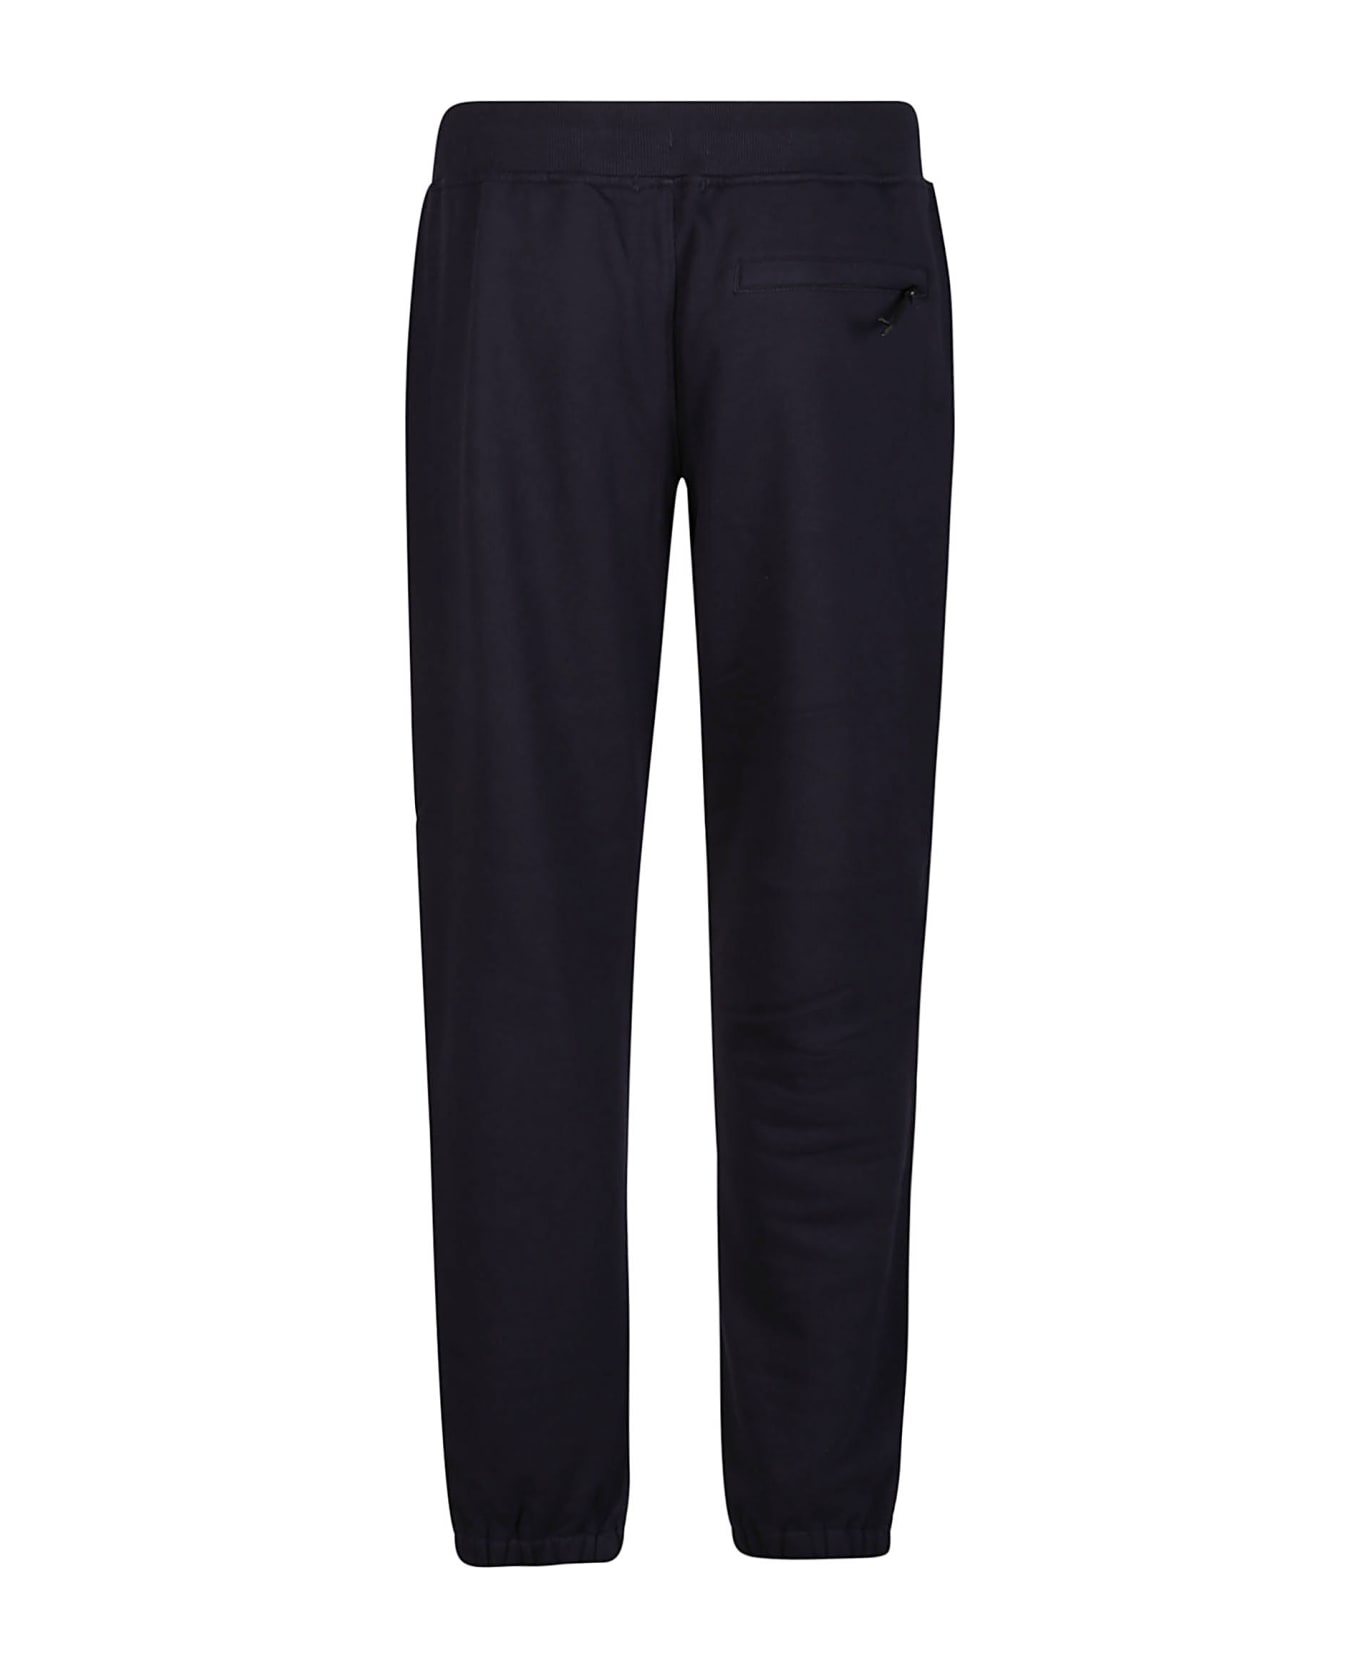 C.P. Company Diagonal Reaised Track Pant - Total Eclipse